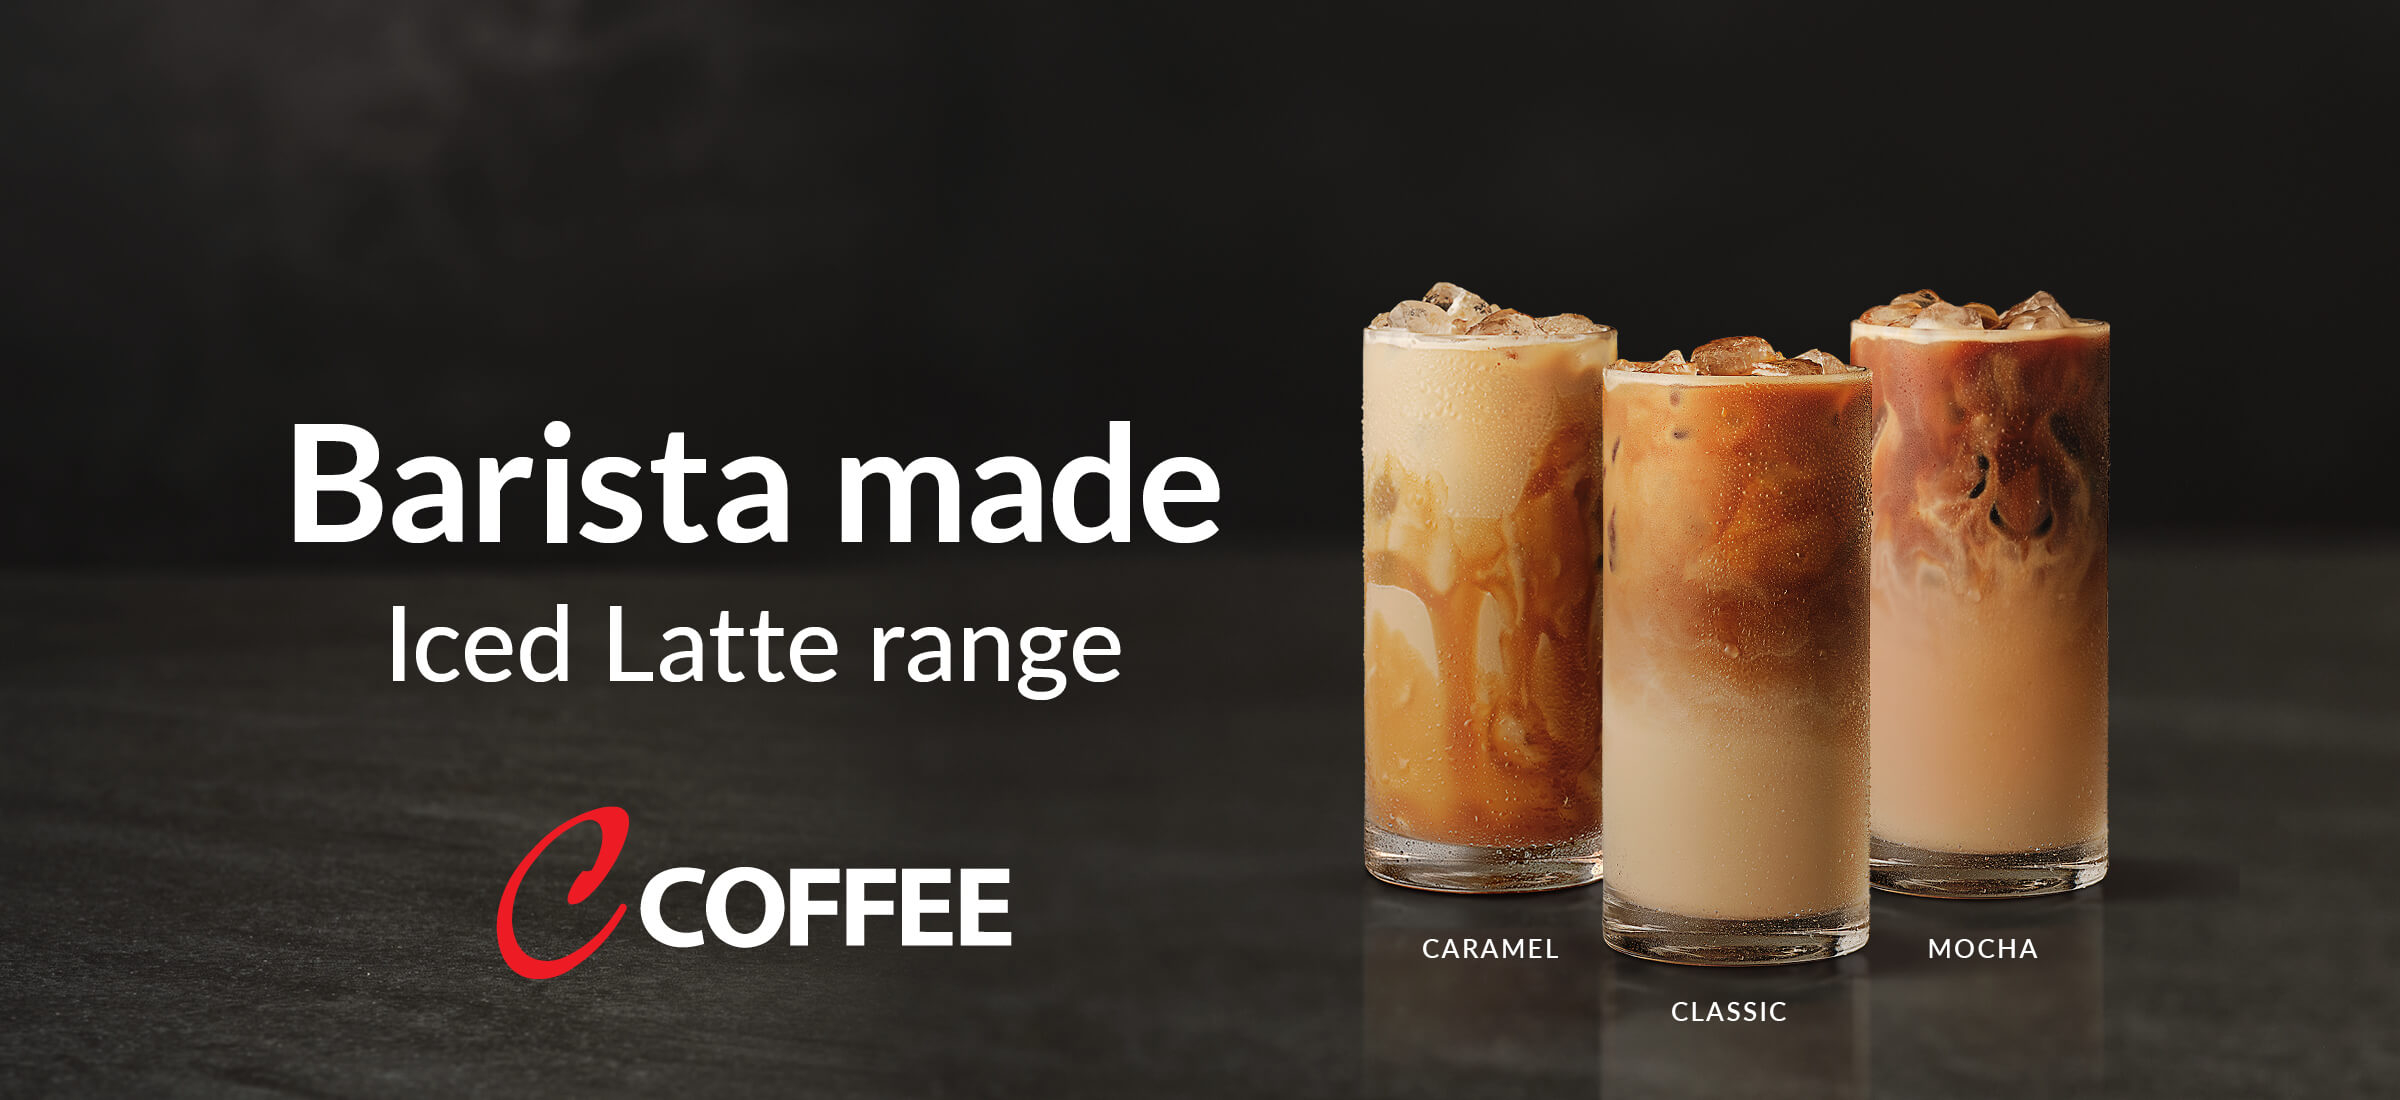 Try out our C Coffee Iced Latte range with your choice of full cream, skim, lactose free, soy, almond or oat milk